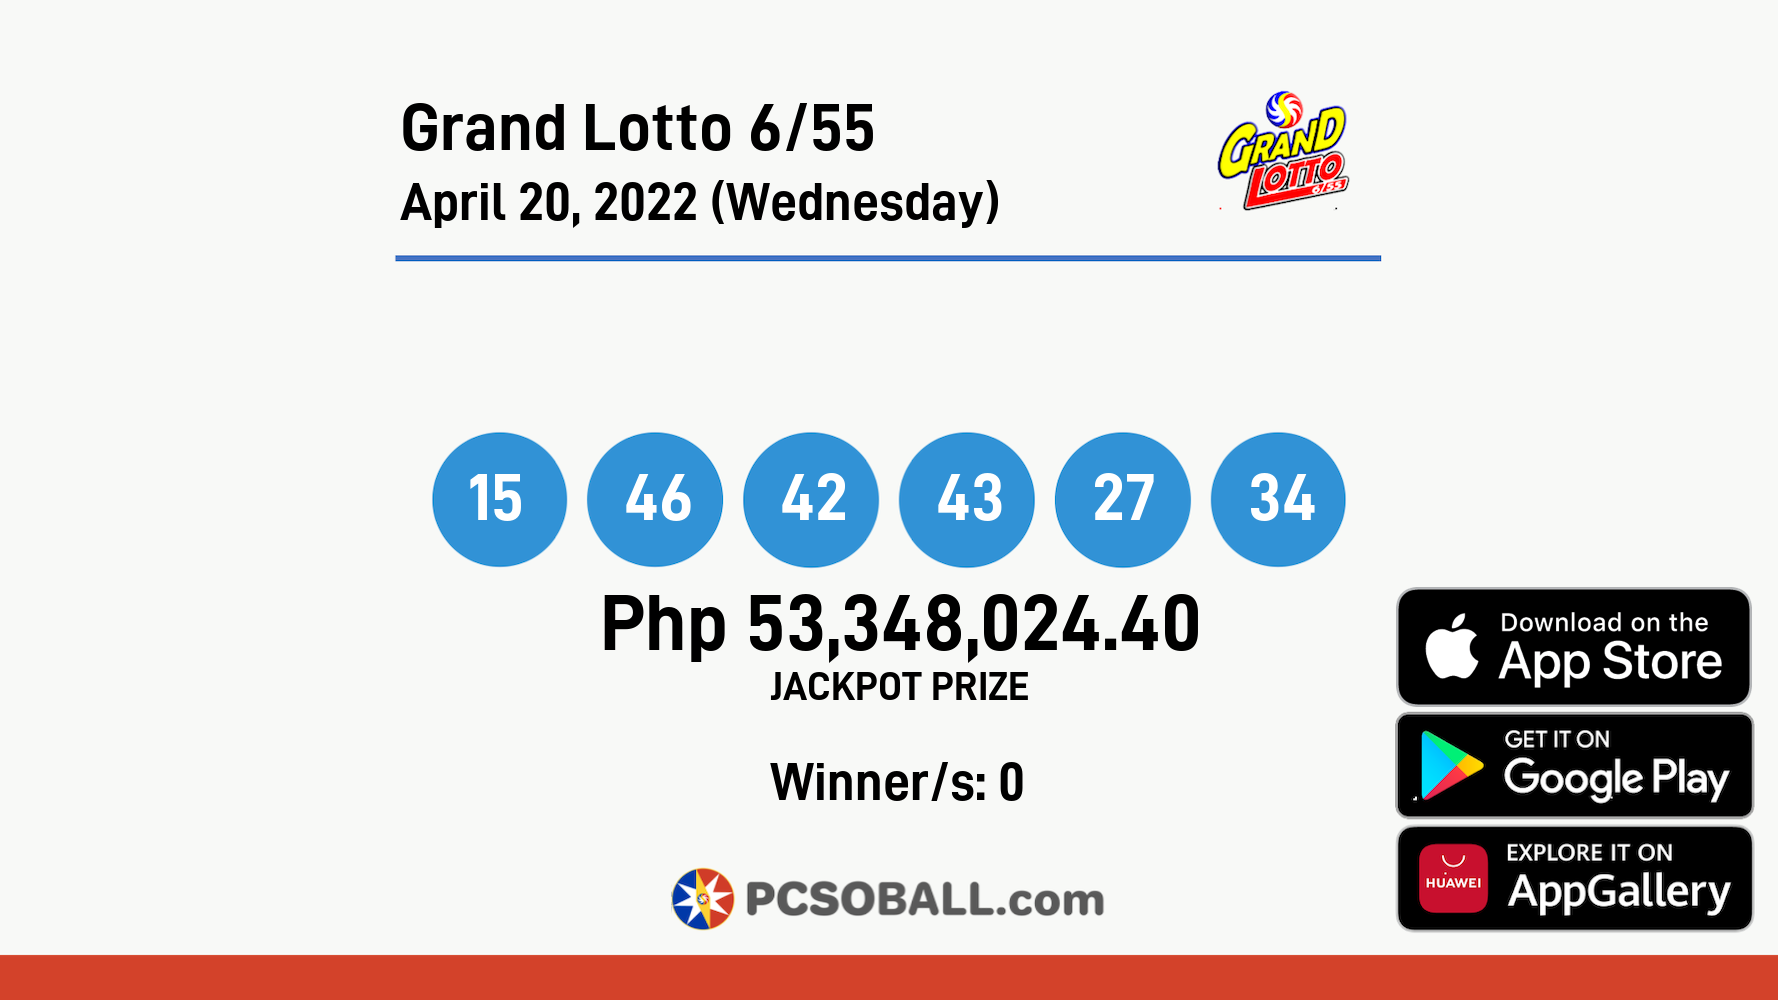 Grand Lotto 6/55 April 20, 2022 (Wednesday) Result